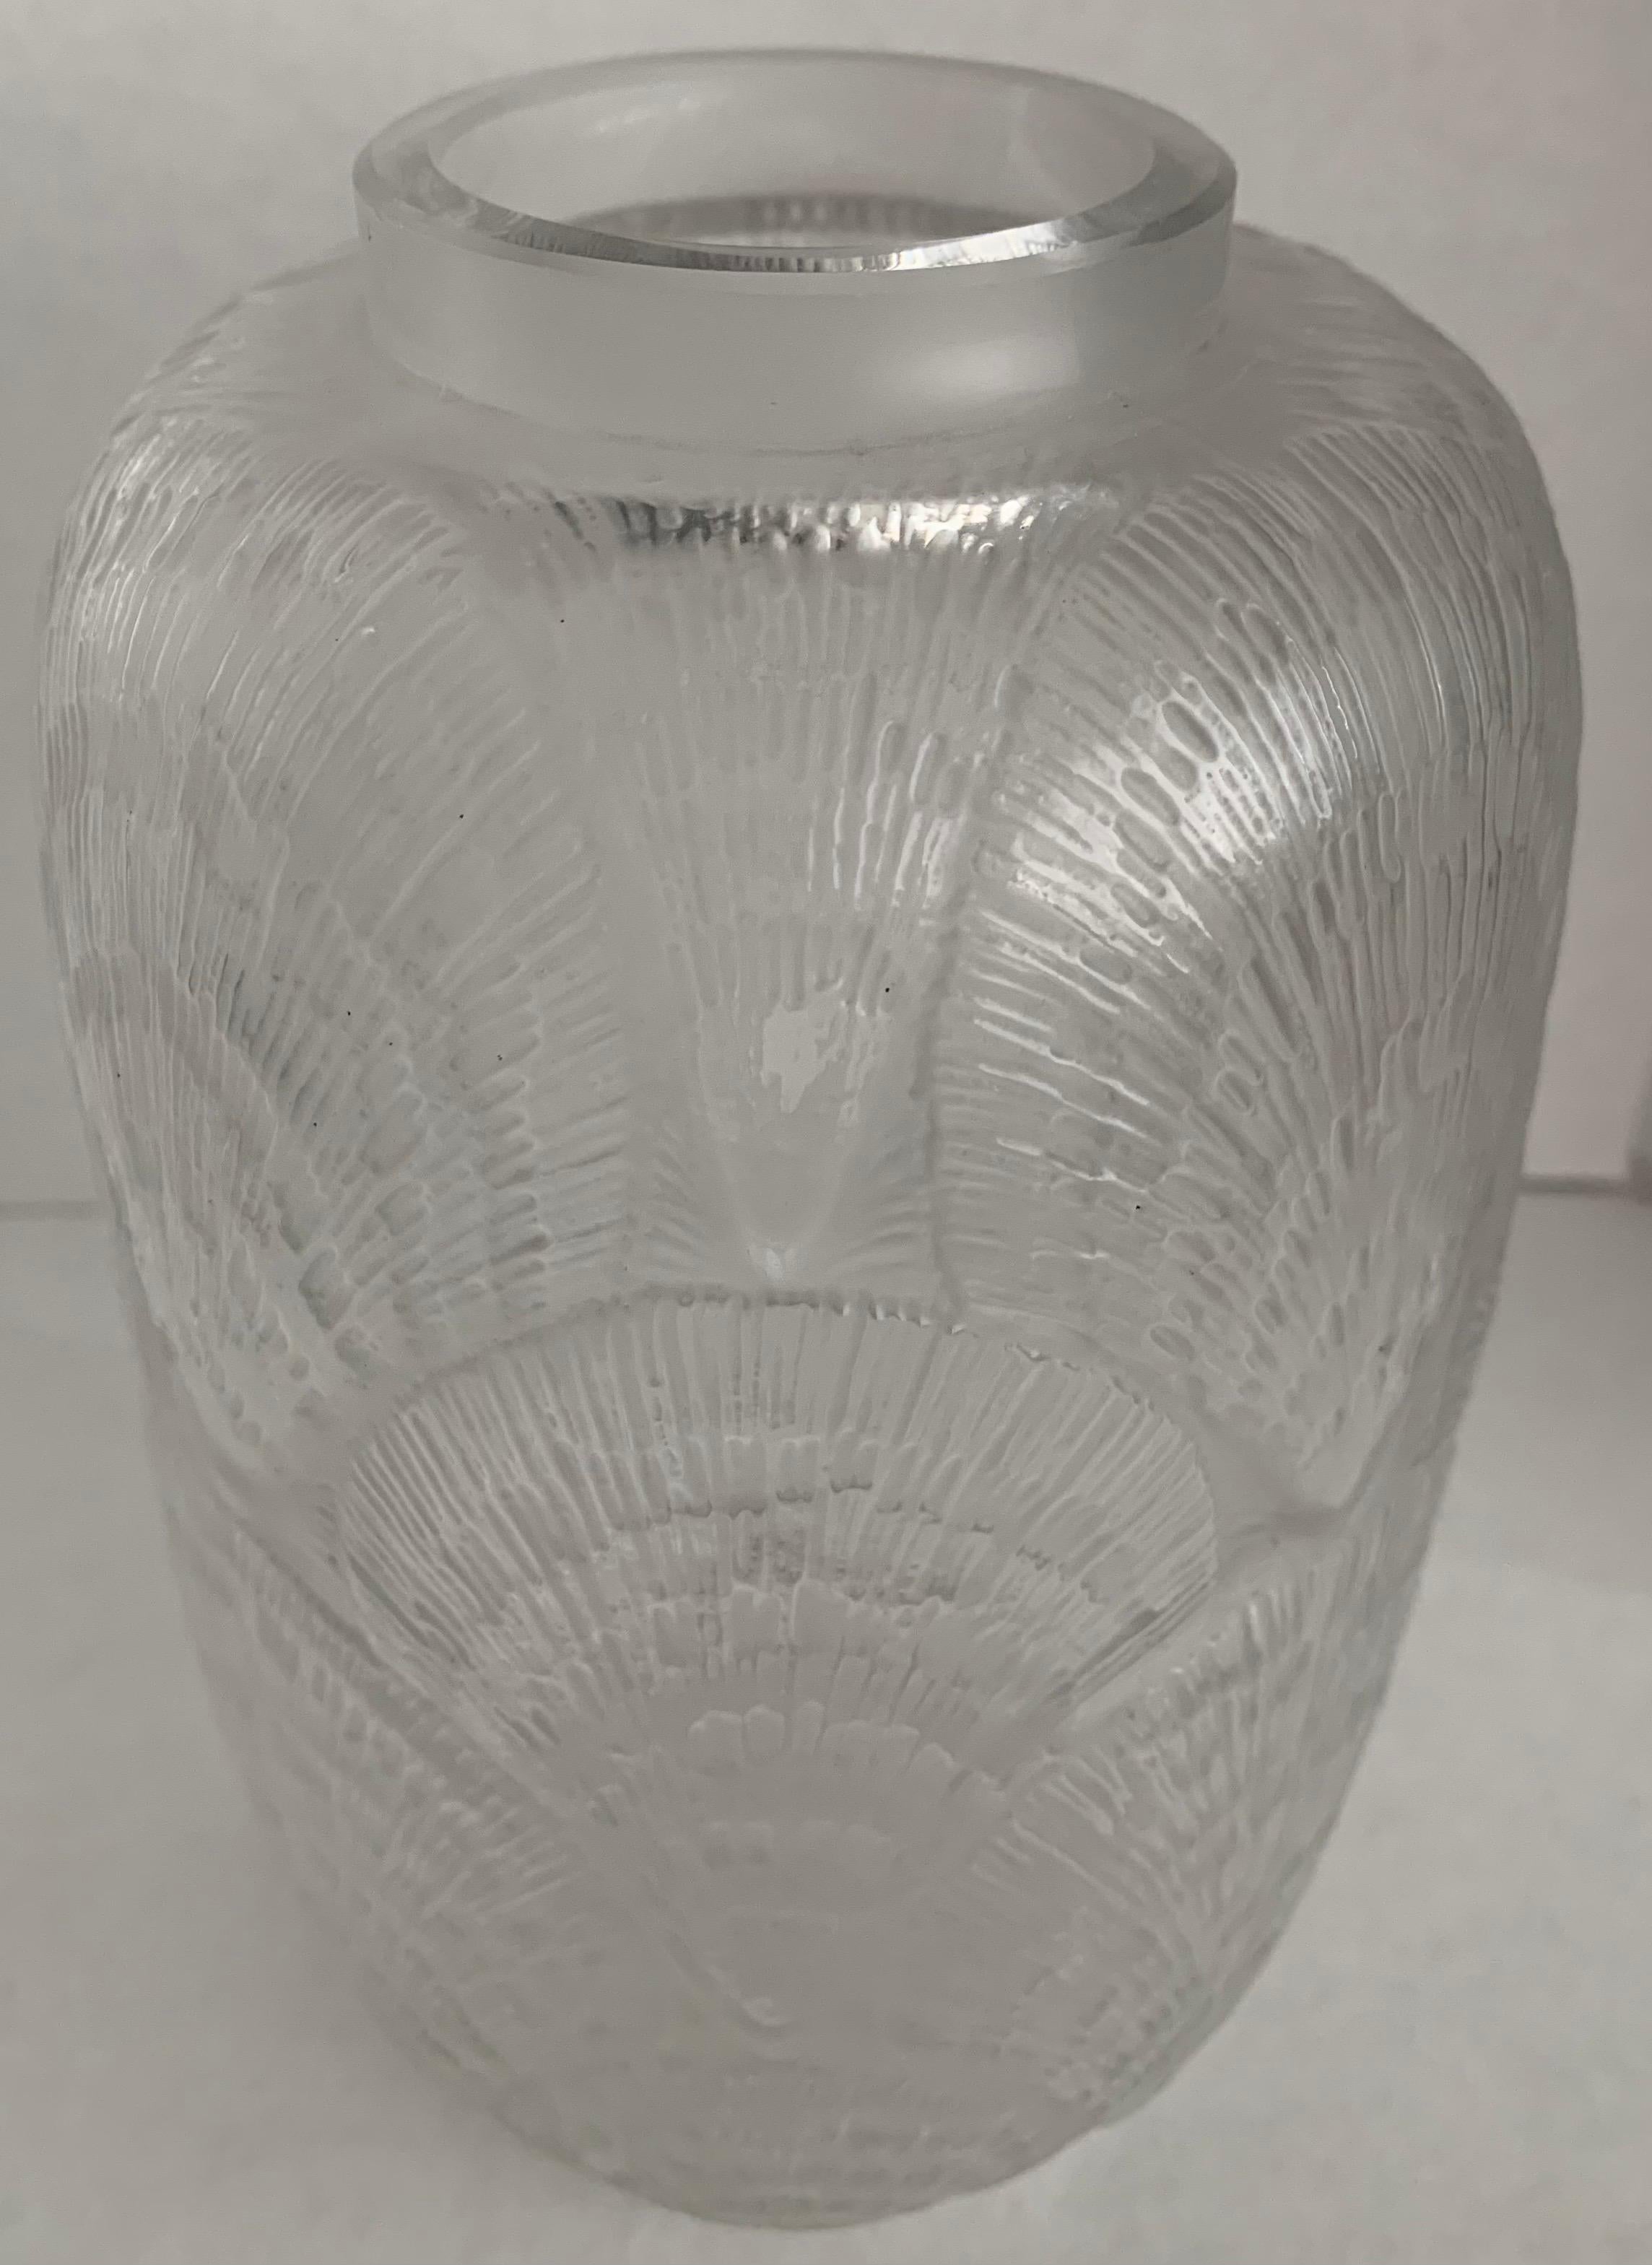 1920s Lalique France opalescent coquilles vase. Etched Lalique France signature on the underside. 